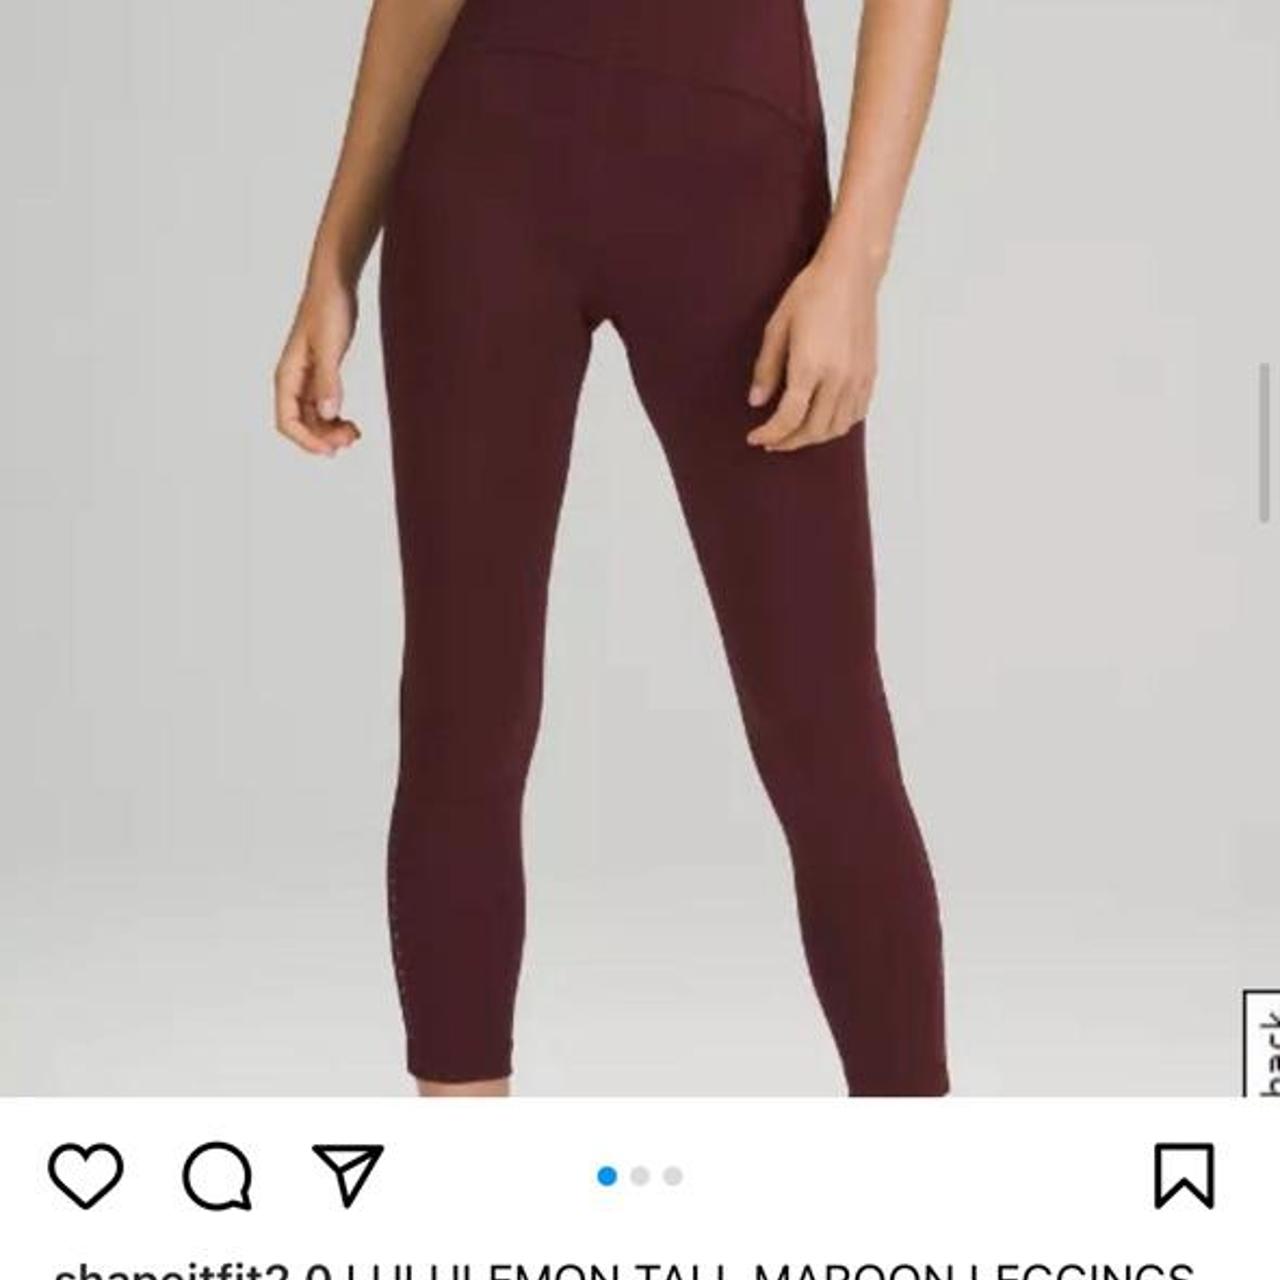 LULULEMON TALL MAROON LEGGINGS IN SIZE 8, These are